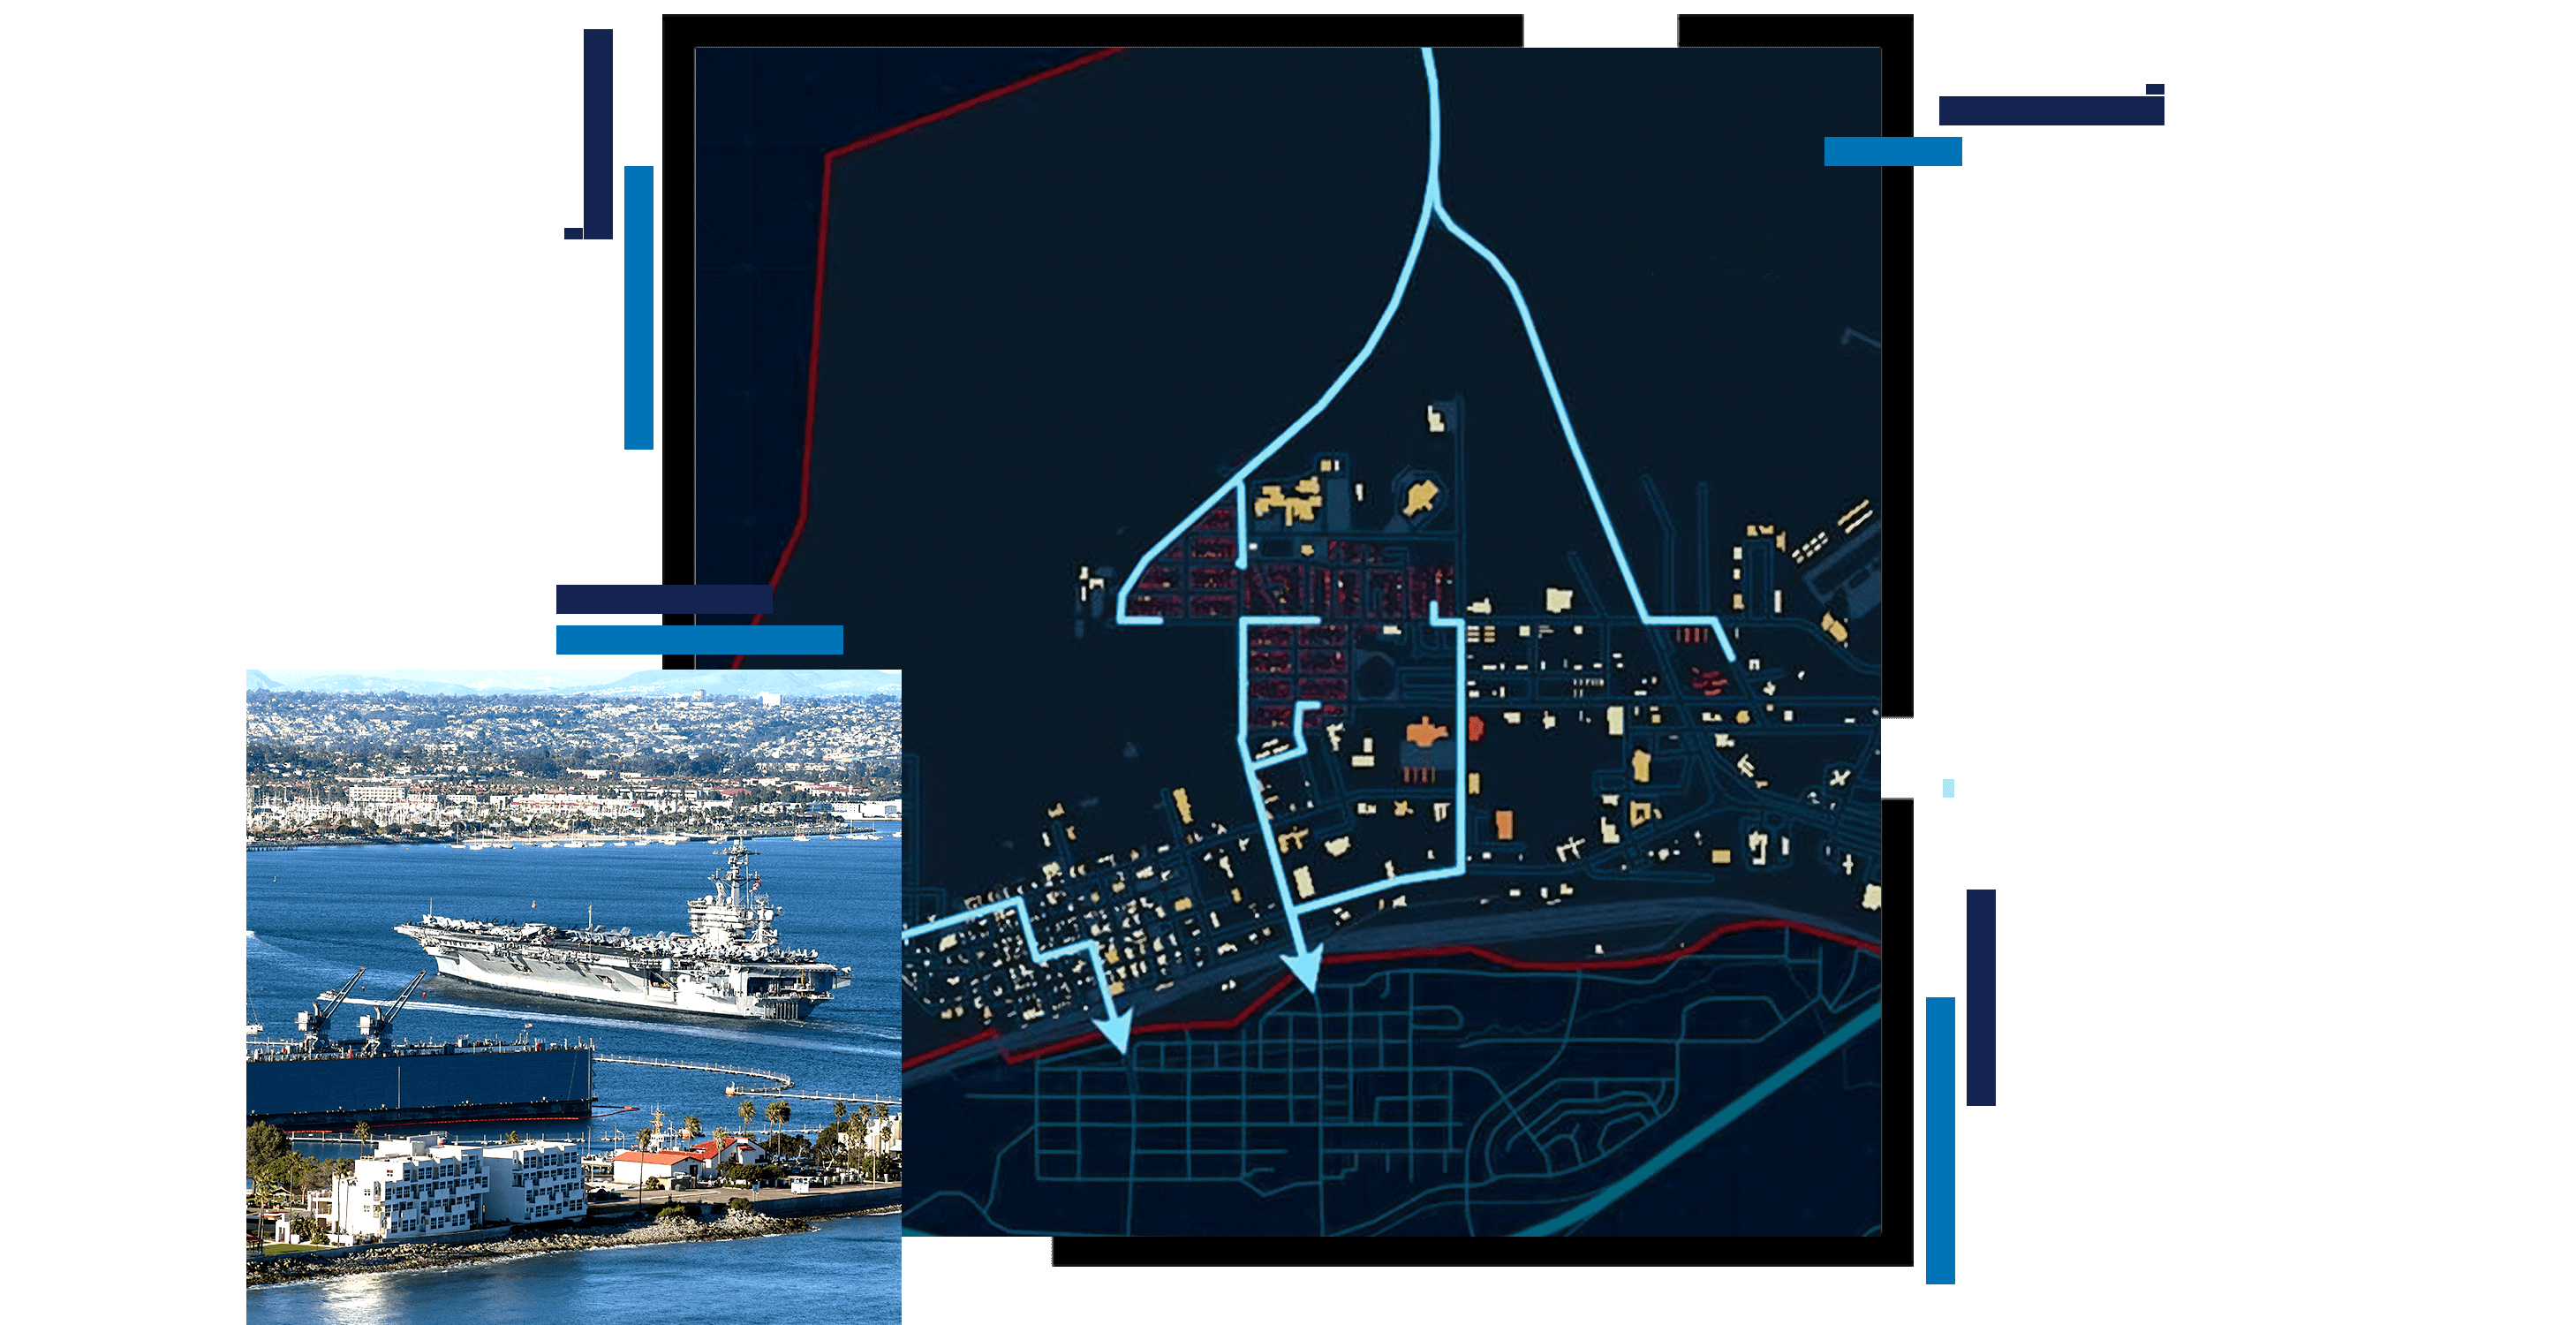 A map of a coastal city in dark blue with routes in light blue, overlaid with a photo of a large ship in a city harbor